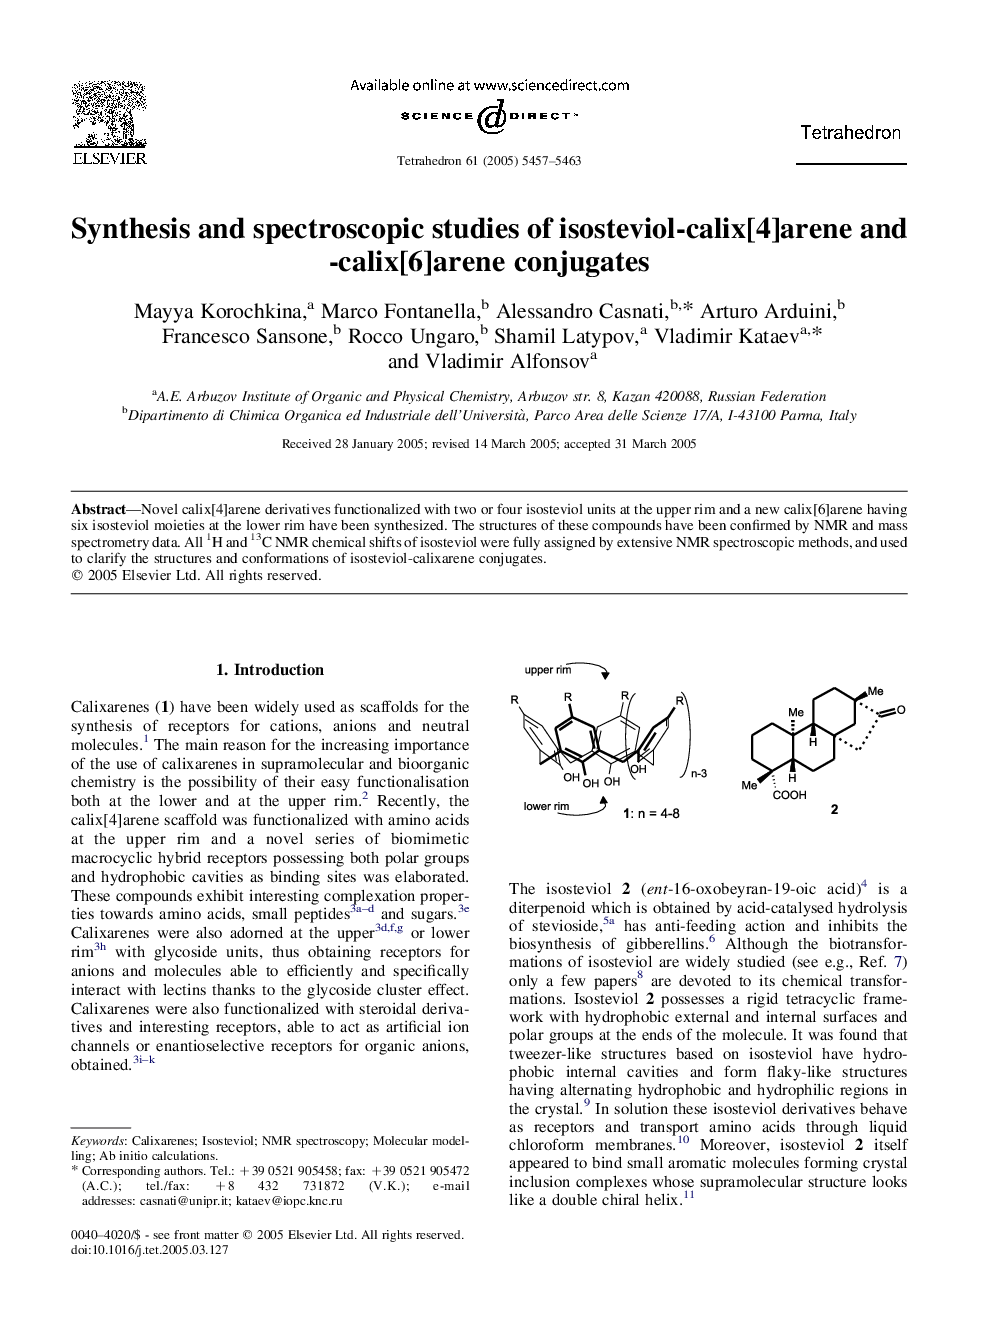 Synthesis and spectroscopic studies of isosteviol-calix[4]arene and -calix[6]arene conjugates